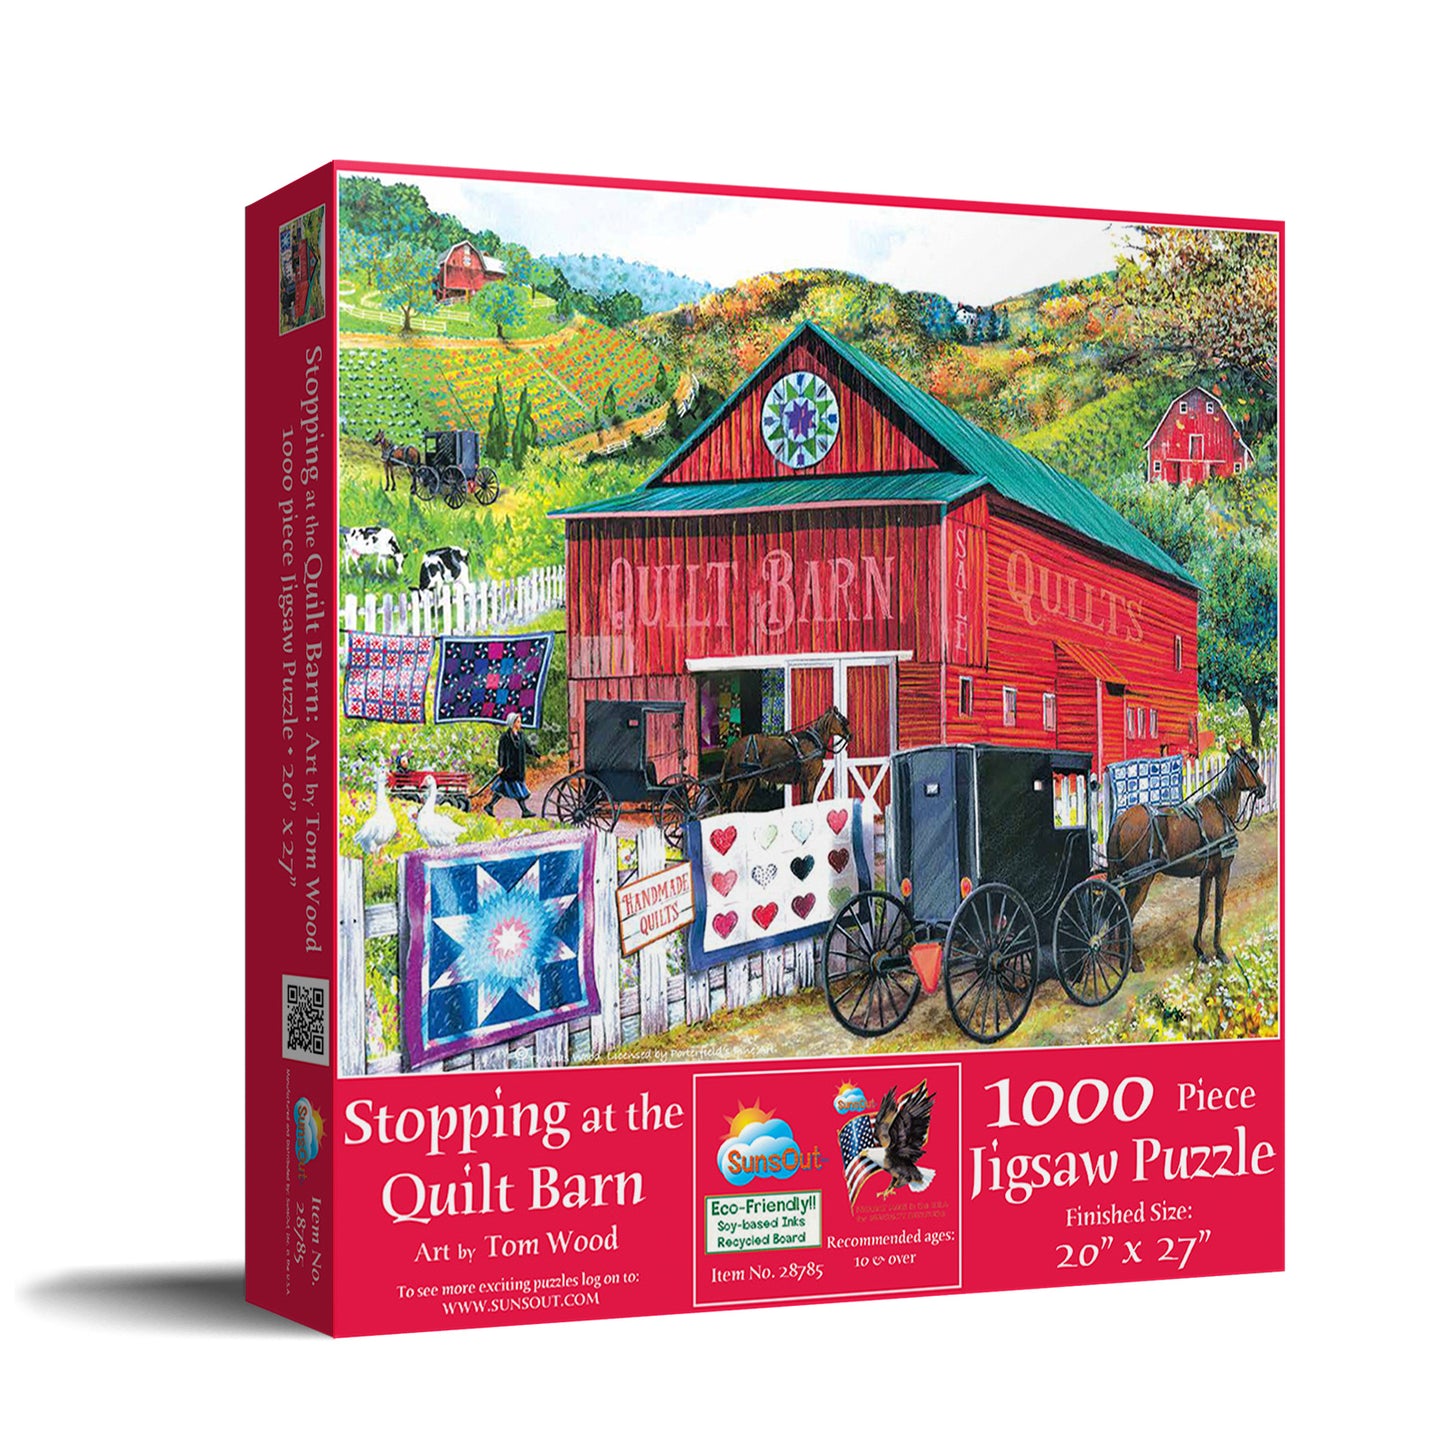 Stopping at the Quilt Barn - 1000 Piece Jigsaw Puzzle